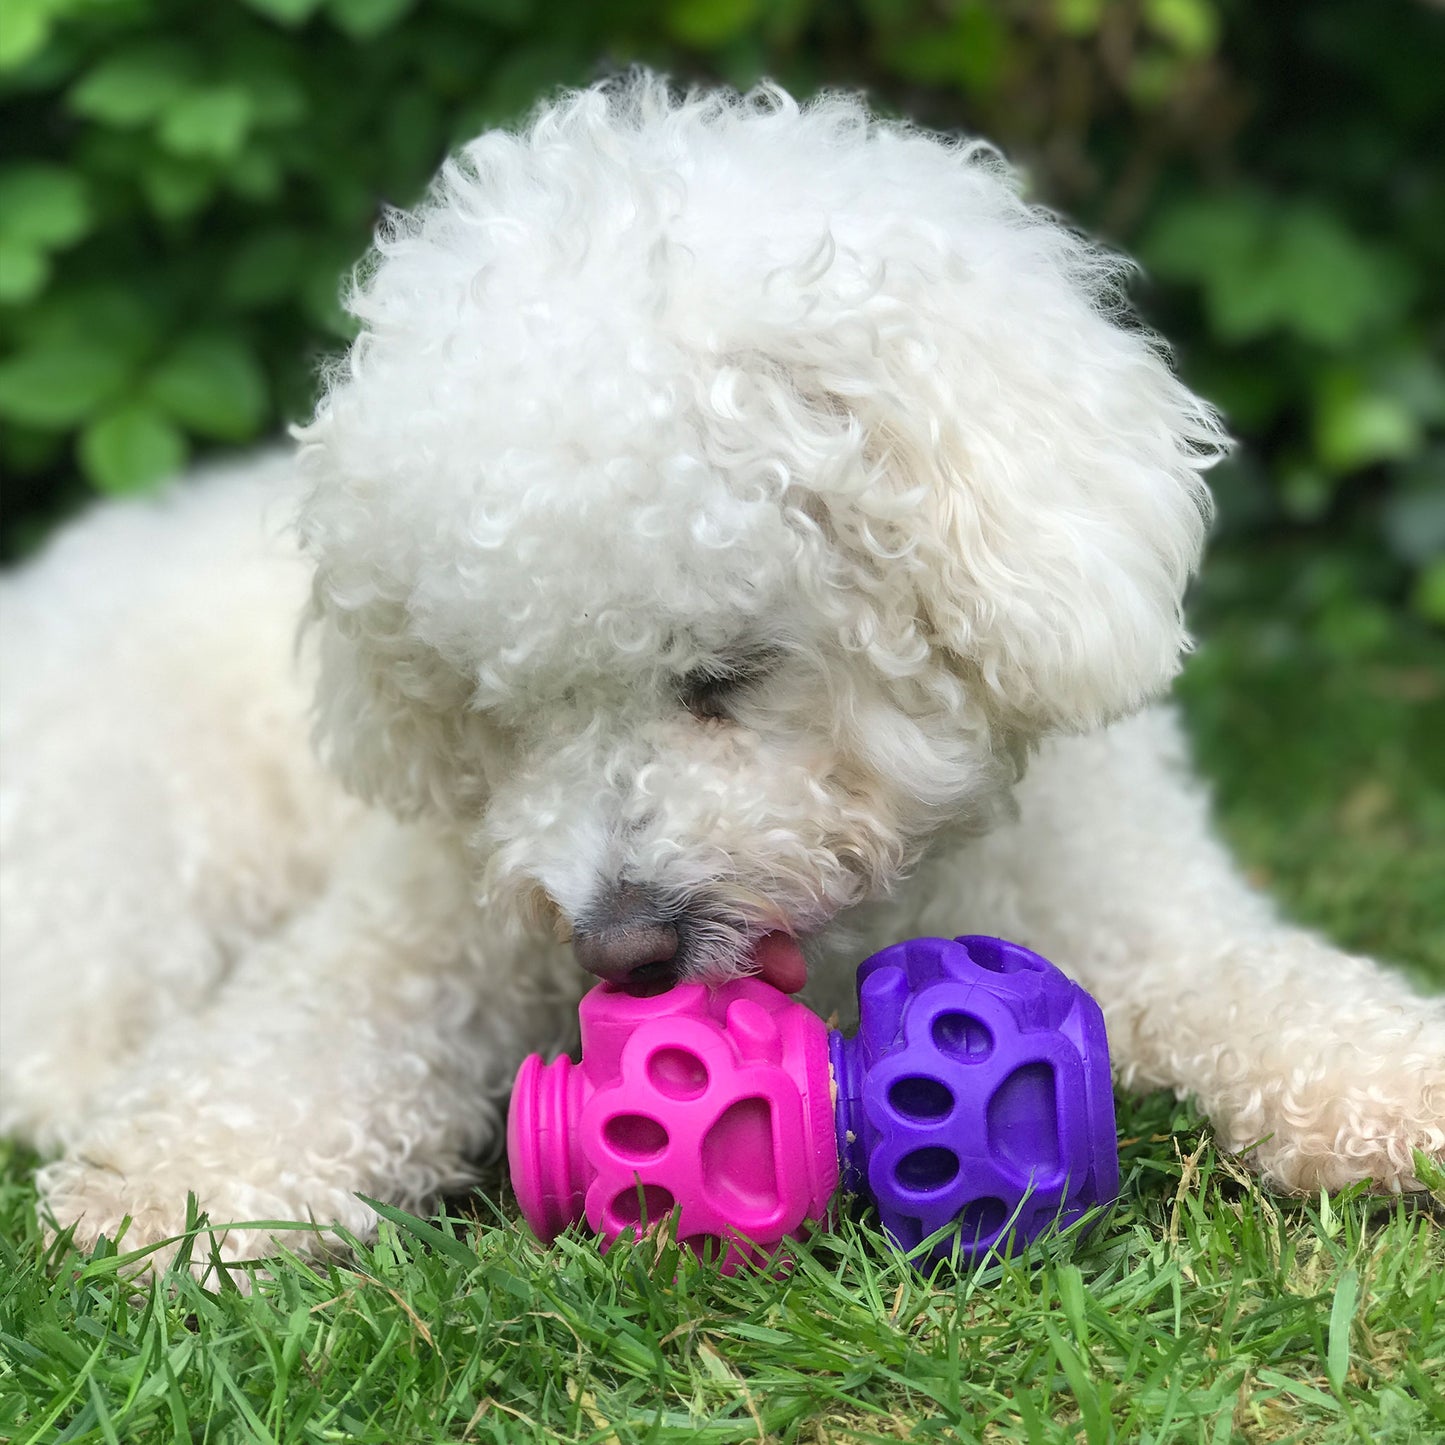 K9connectable interactive dog toys –